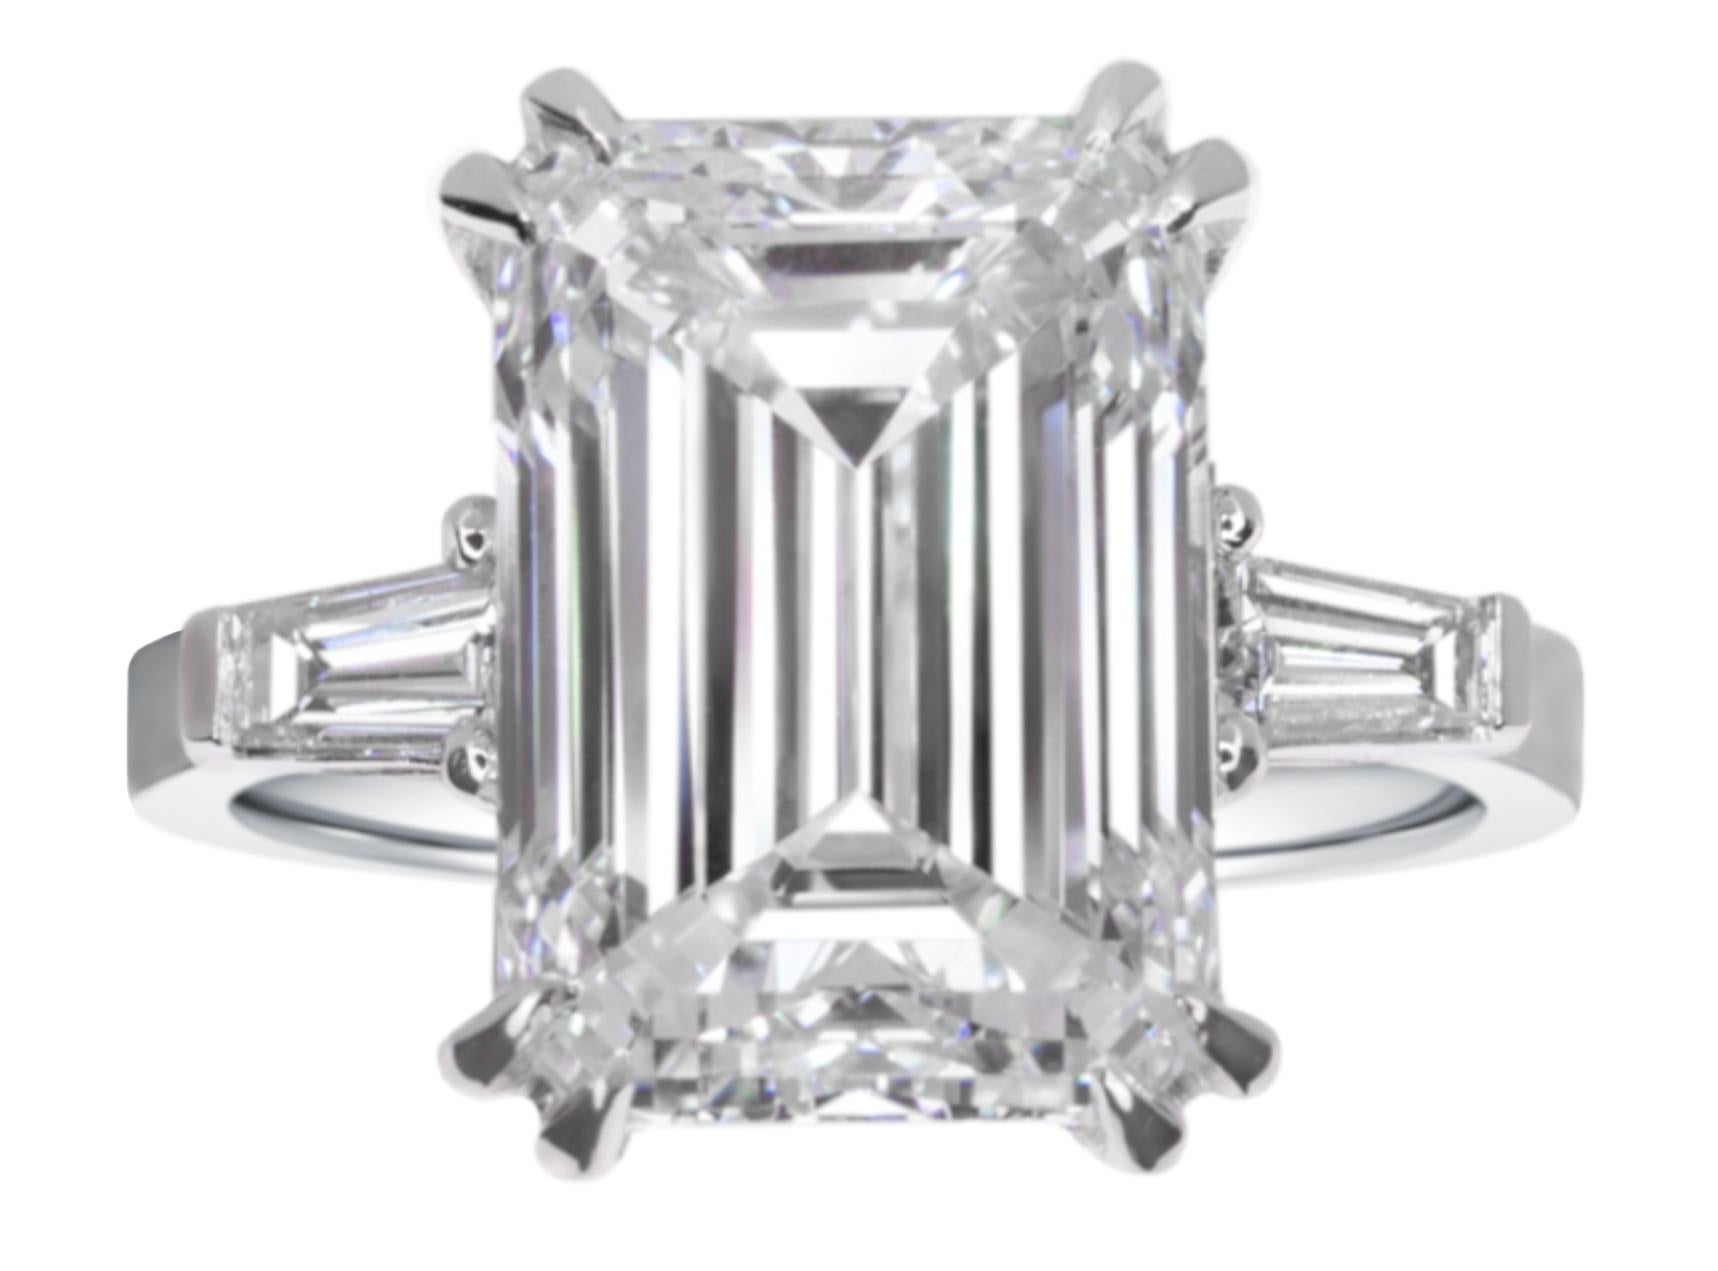 Diamond engagement ring, centering a fine i color and vs1 clarity emerald-cut diamond weighing 5 carats with a pair of tapered baguette-cut diamond shoulders, mounted in 18 carats white gold.